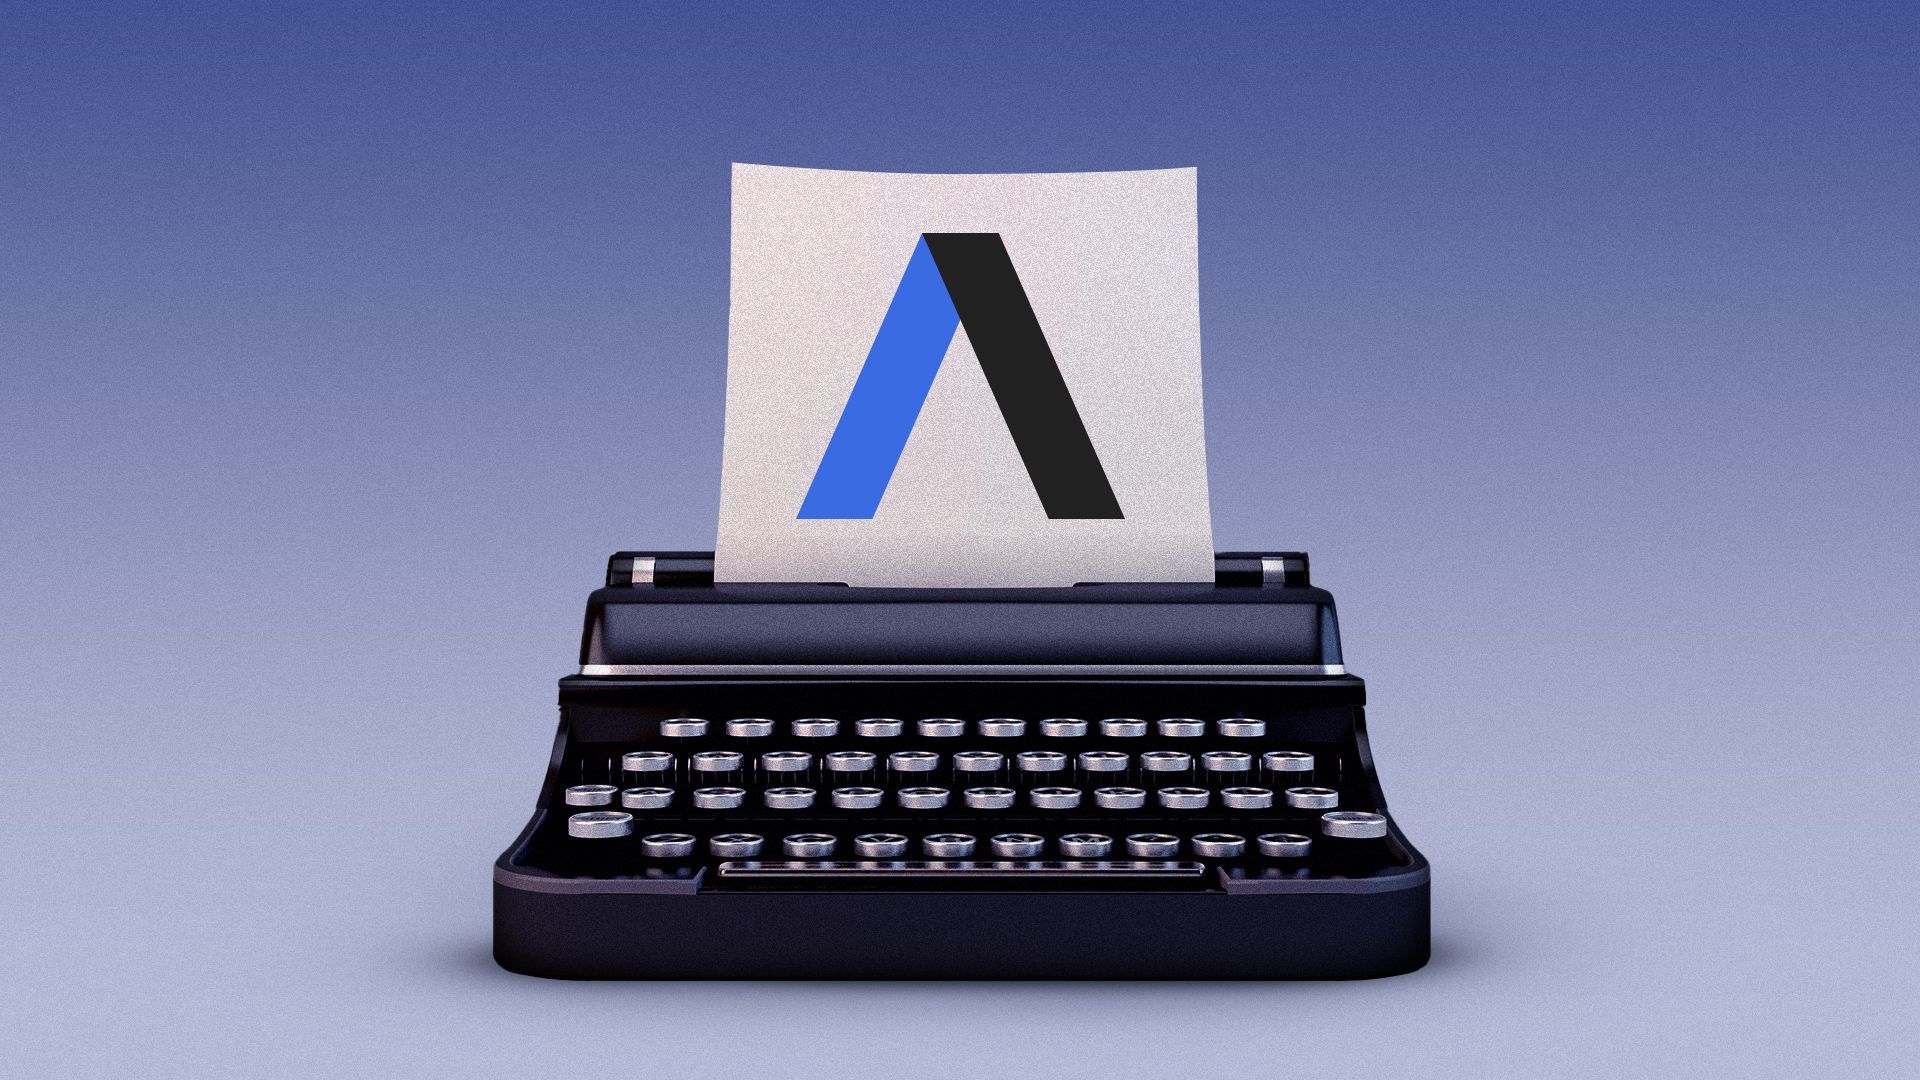 Illustration of a typewriter with the Axios "A" logo on the paper. 